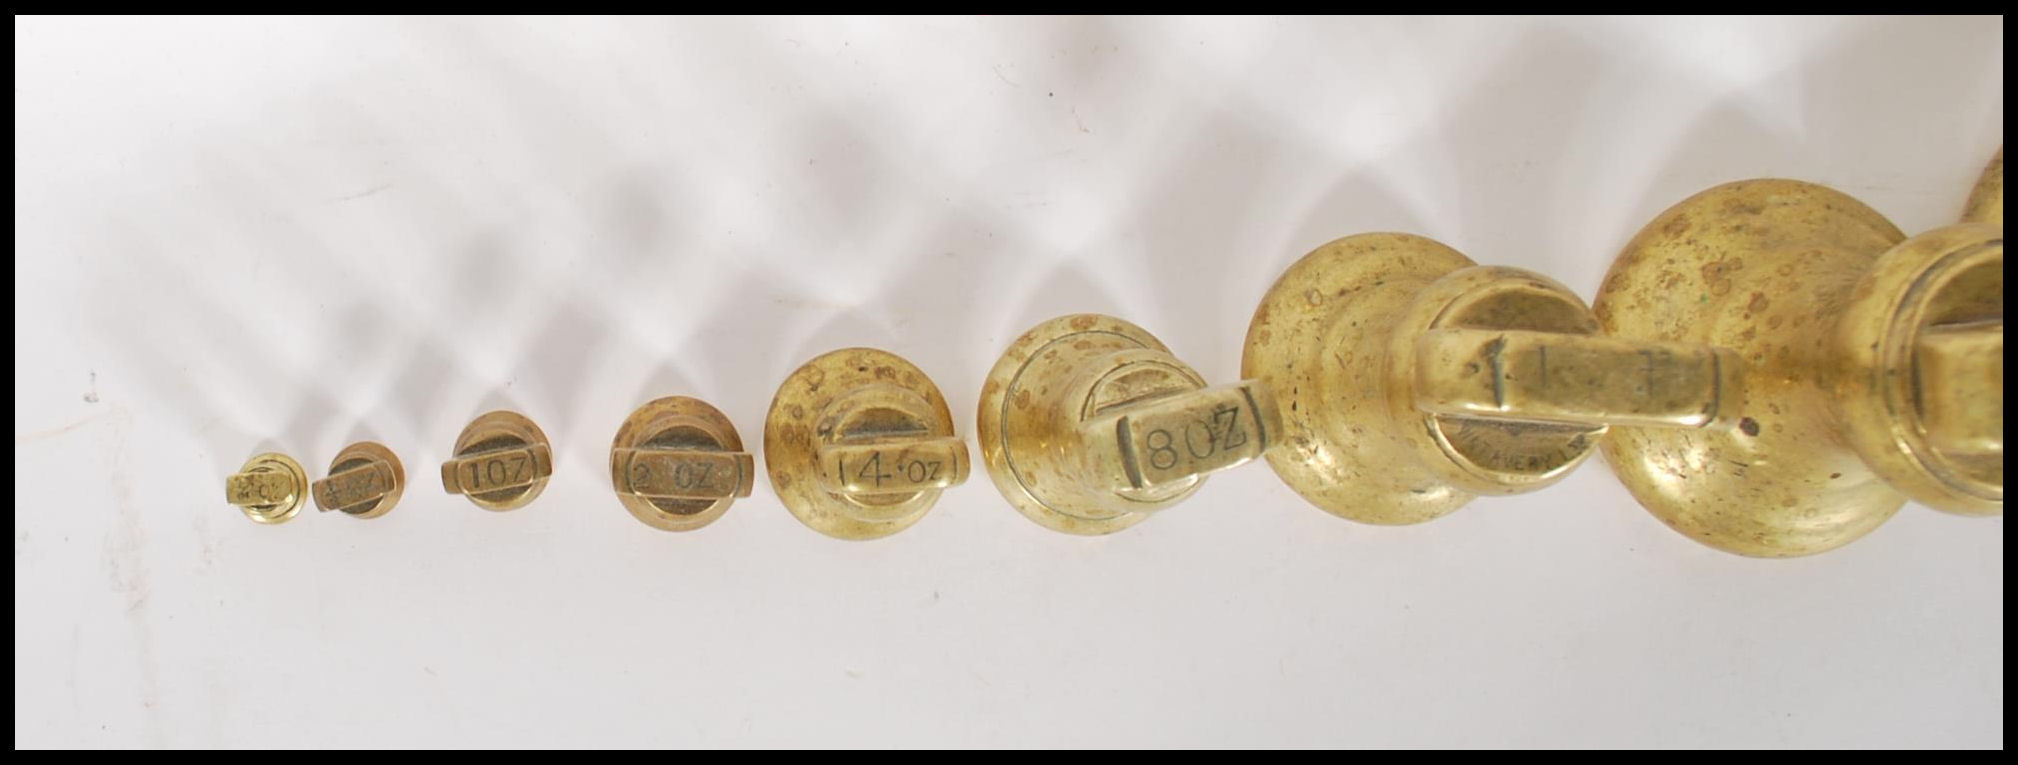 A selection of 20th century graduating brass bell weights having carrying handles atop, with the - Image 7 of 7